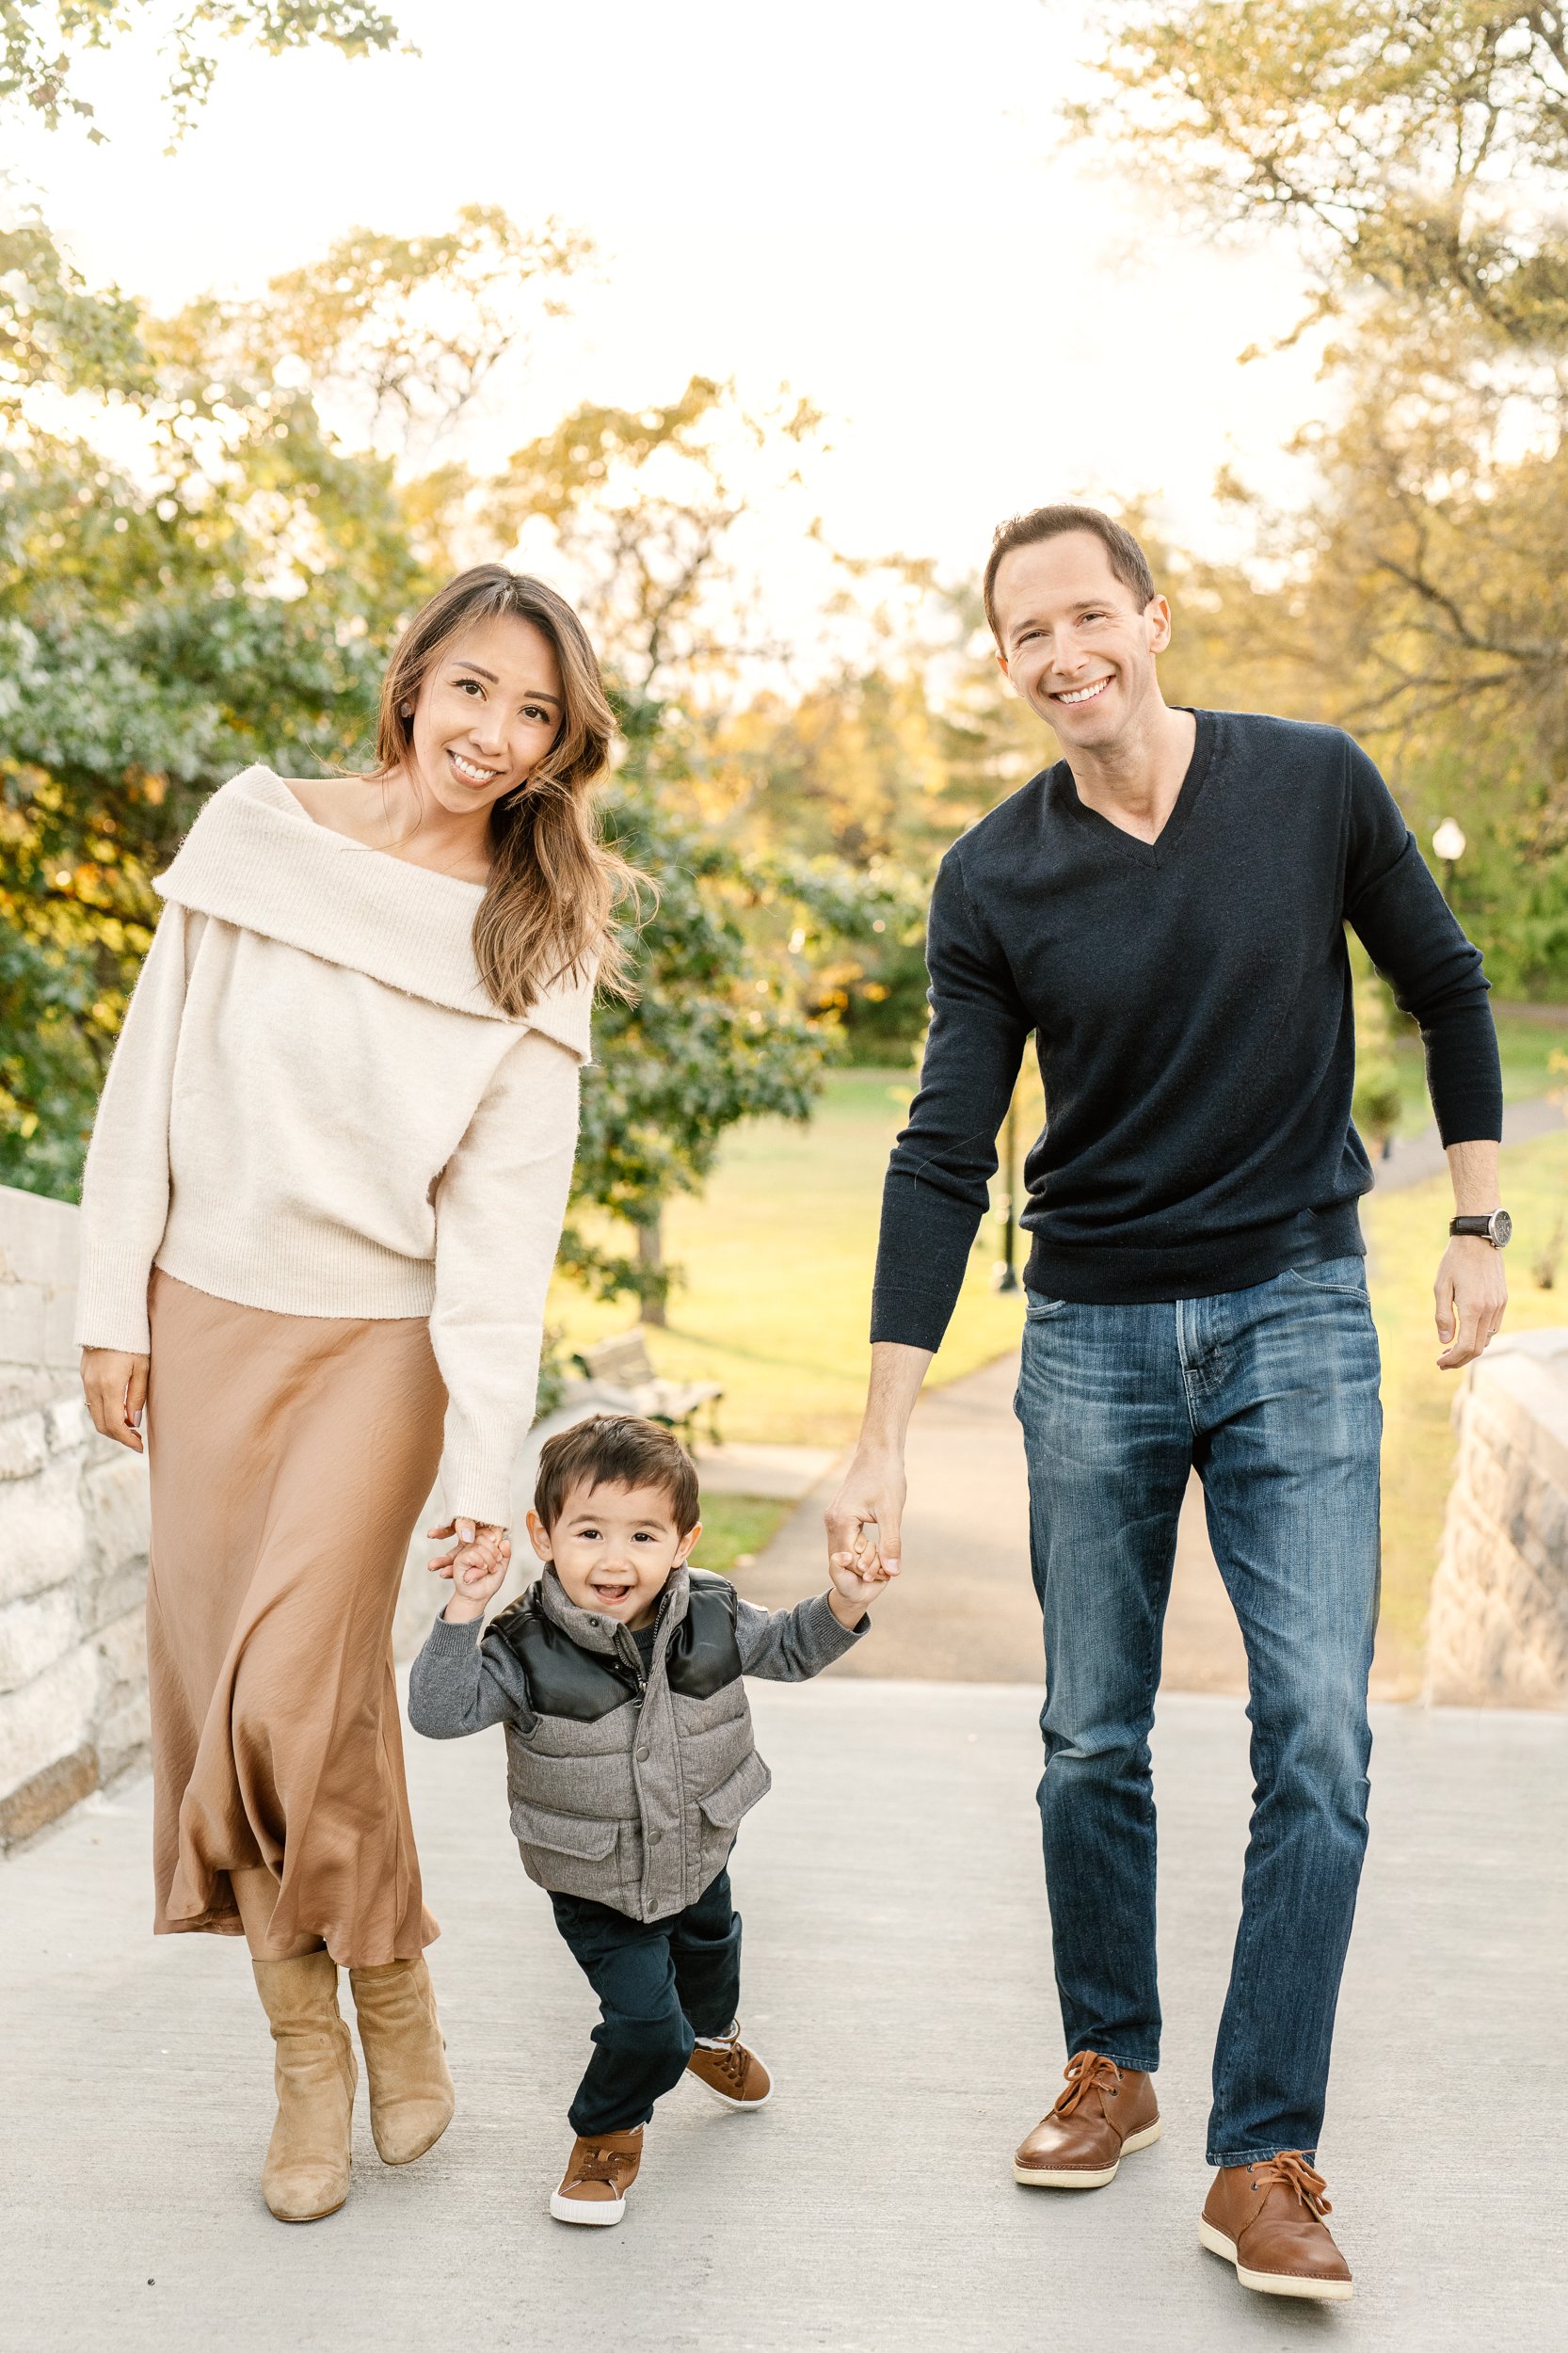  In Northern New Jersey at Verona Park, a mother in a tan skirt and a father in a black sweater help their young son walk by holding his hands by Nicole Hawkins Photography. sweaters for pictures black man sweater cream sweater #nicolehawkinsphotogra